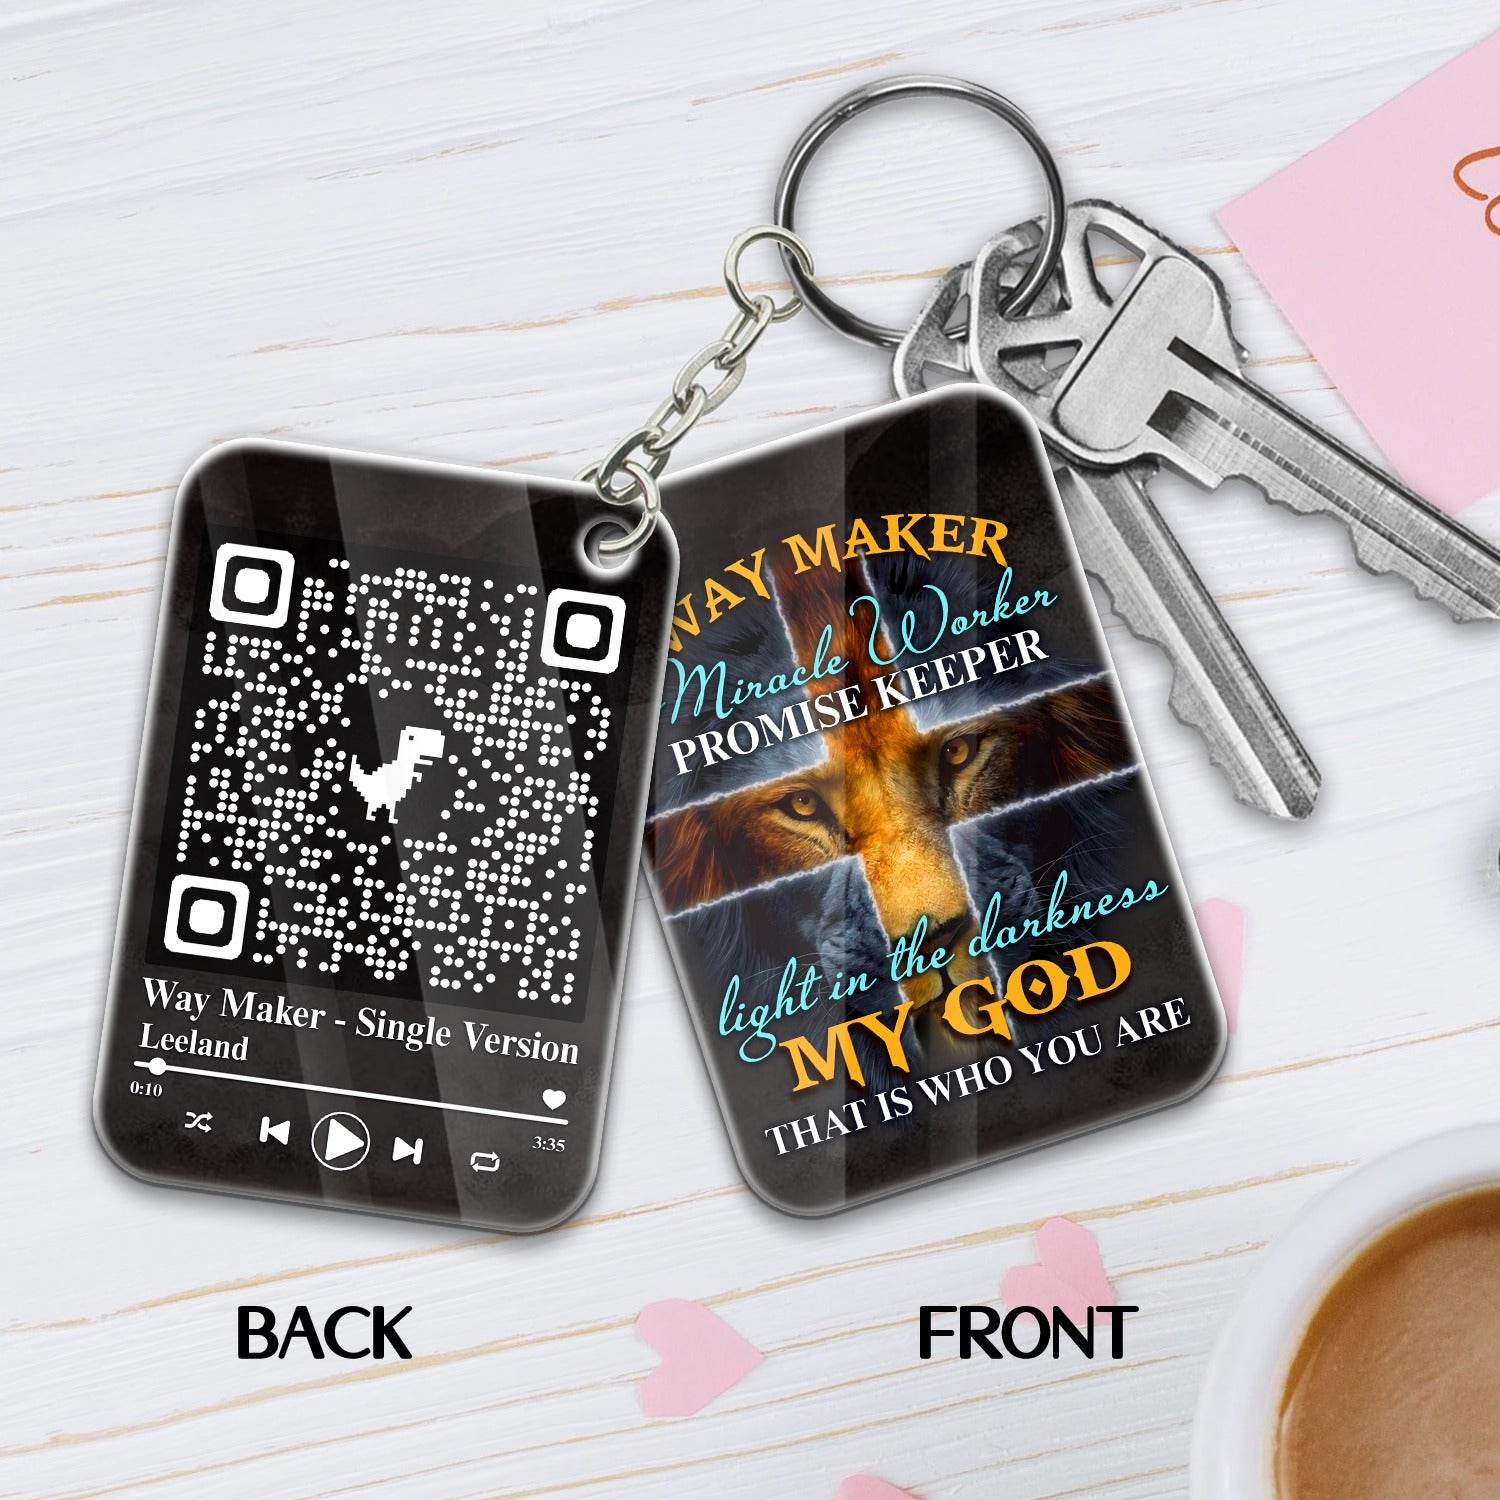 Way Maker Miracle Worker Promise Keeper Light In The Darkness My God Song Scannable QR Code Acrylic Keychain